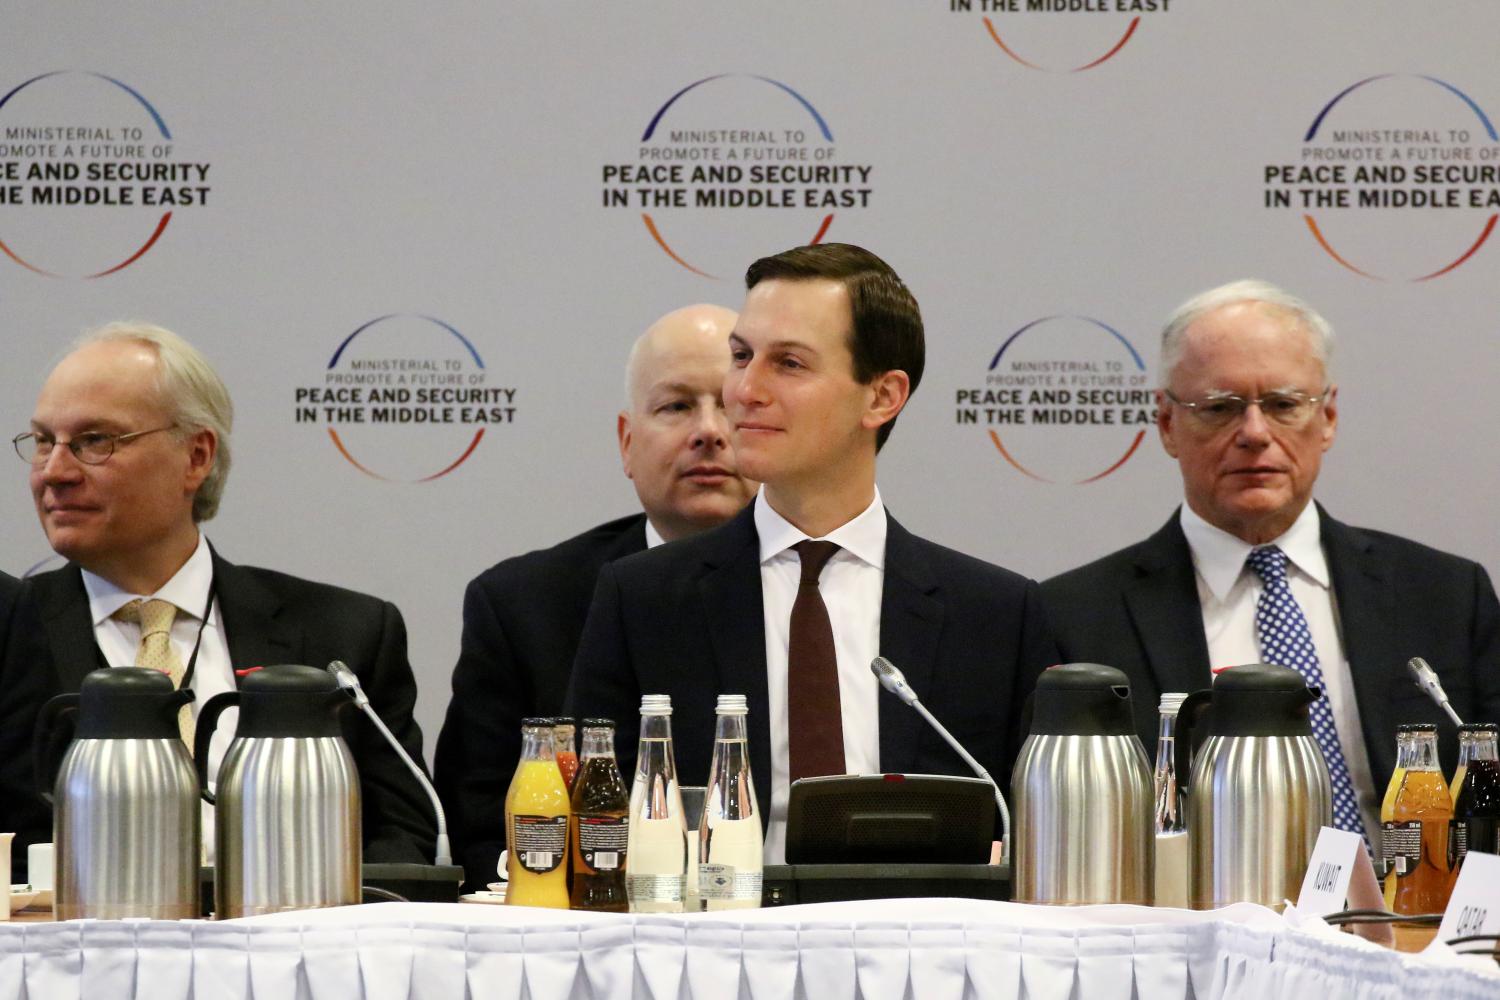 White House adviser Jared Kushner attends a plenary session at the Middle East summit in Warsaw, Poland, February 14, 2019. Agencja Gazeta/Slawomir Kaminski via REUTERS ATTENTION EDITORS - THIS IMAGE WAS PROVIDED BY A THIRD PARTY. POLAND OUT. NO COMMERCIAL OR EDITORIAL SALES IN POLAND. - RC1F9B11F600